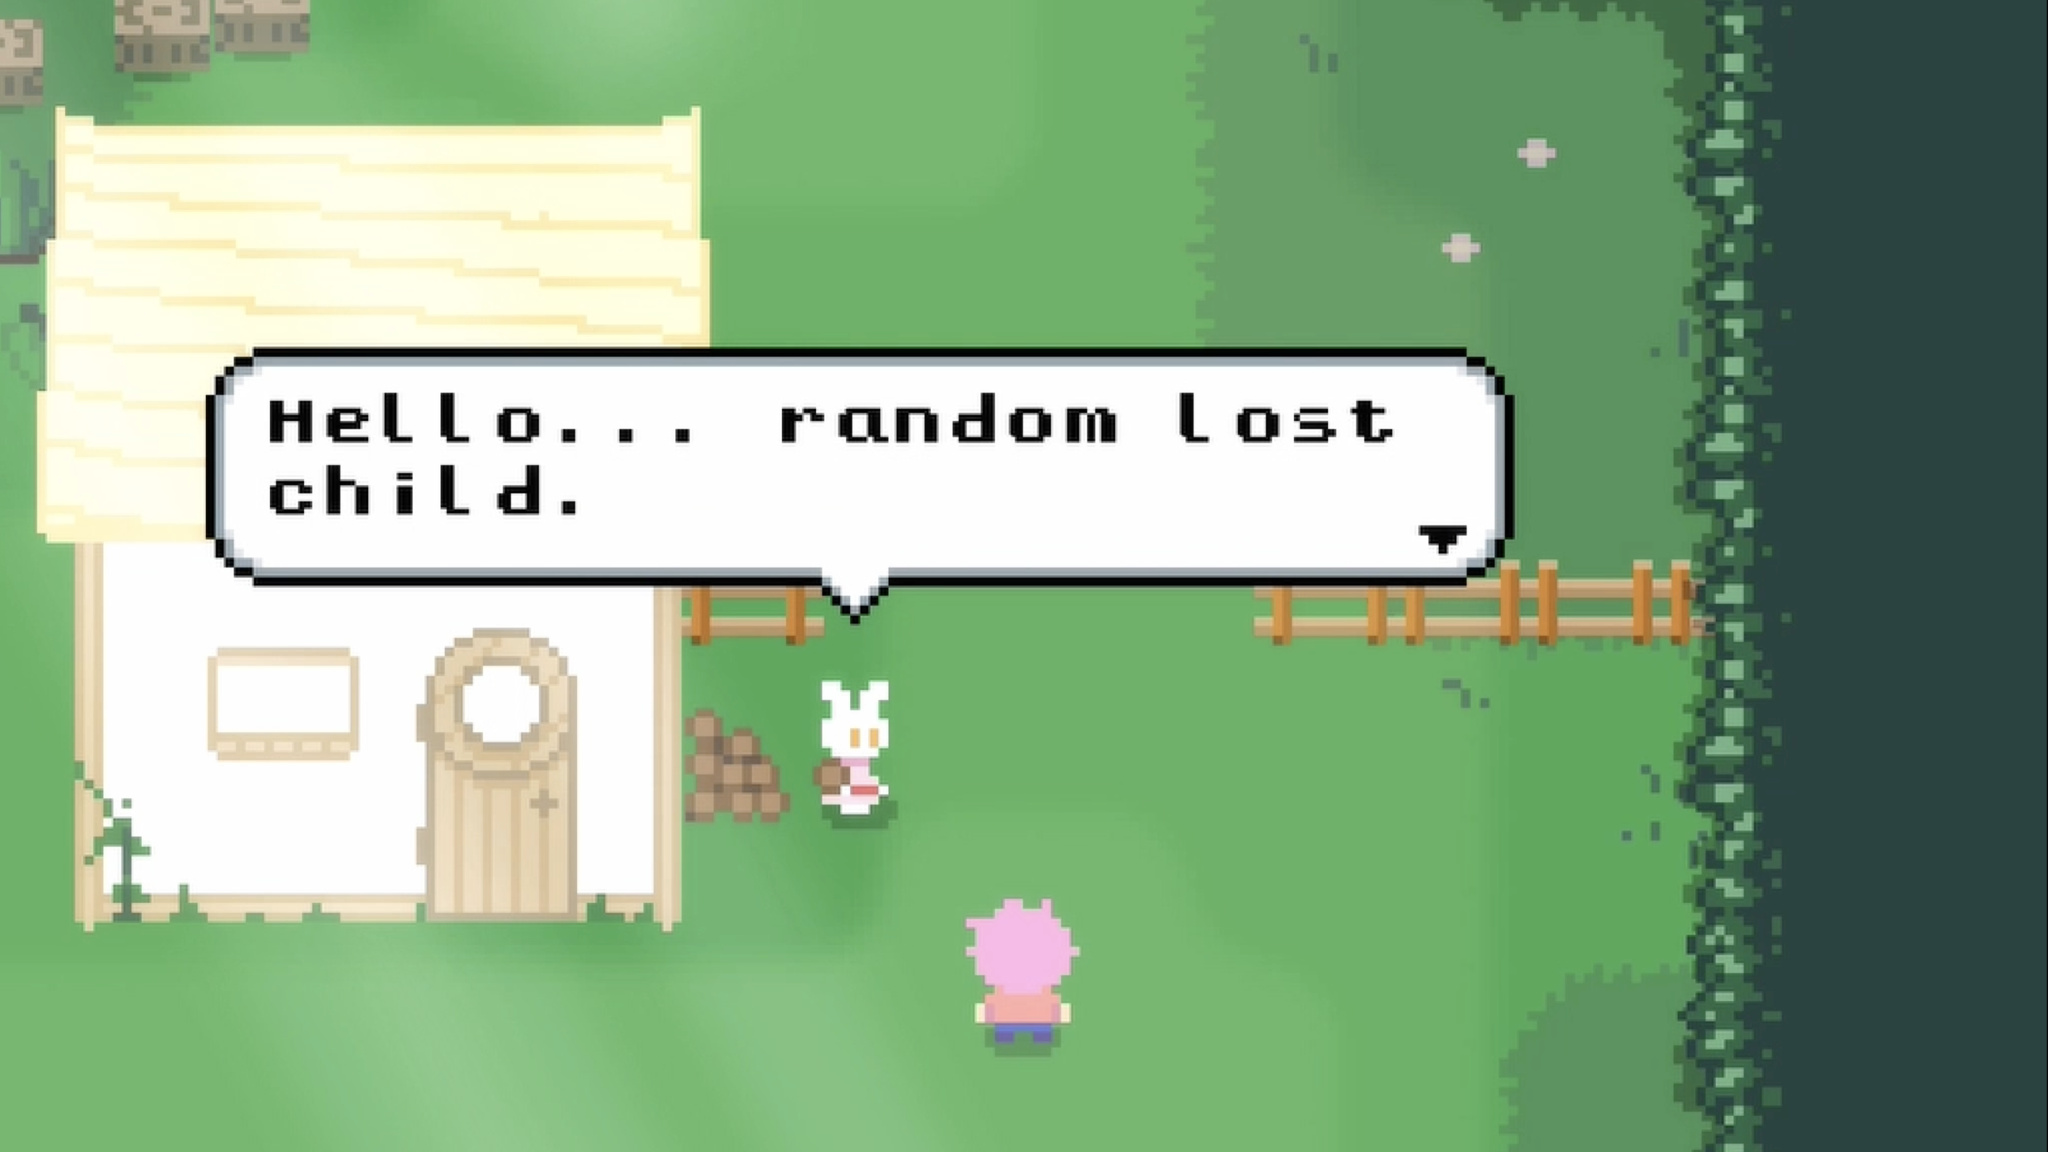 A screenshot of the game Afterplace, in which the main character interacts with a friendly rabbit who says, “Hello… random lost child.”